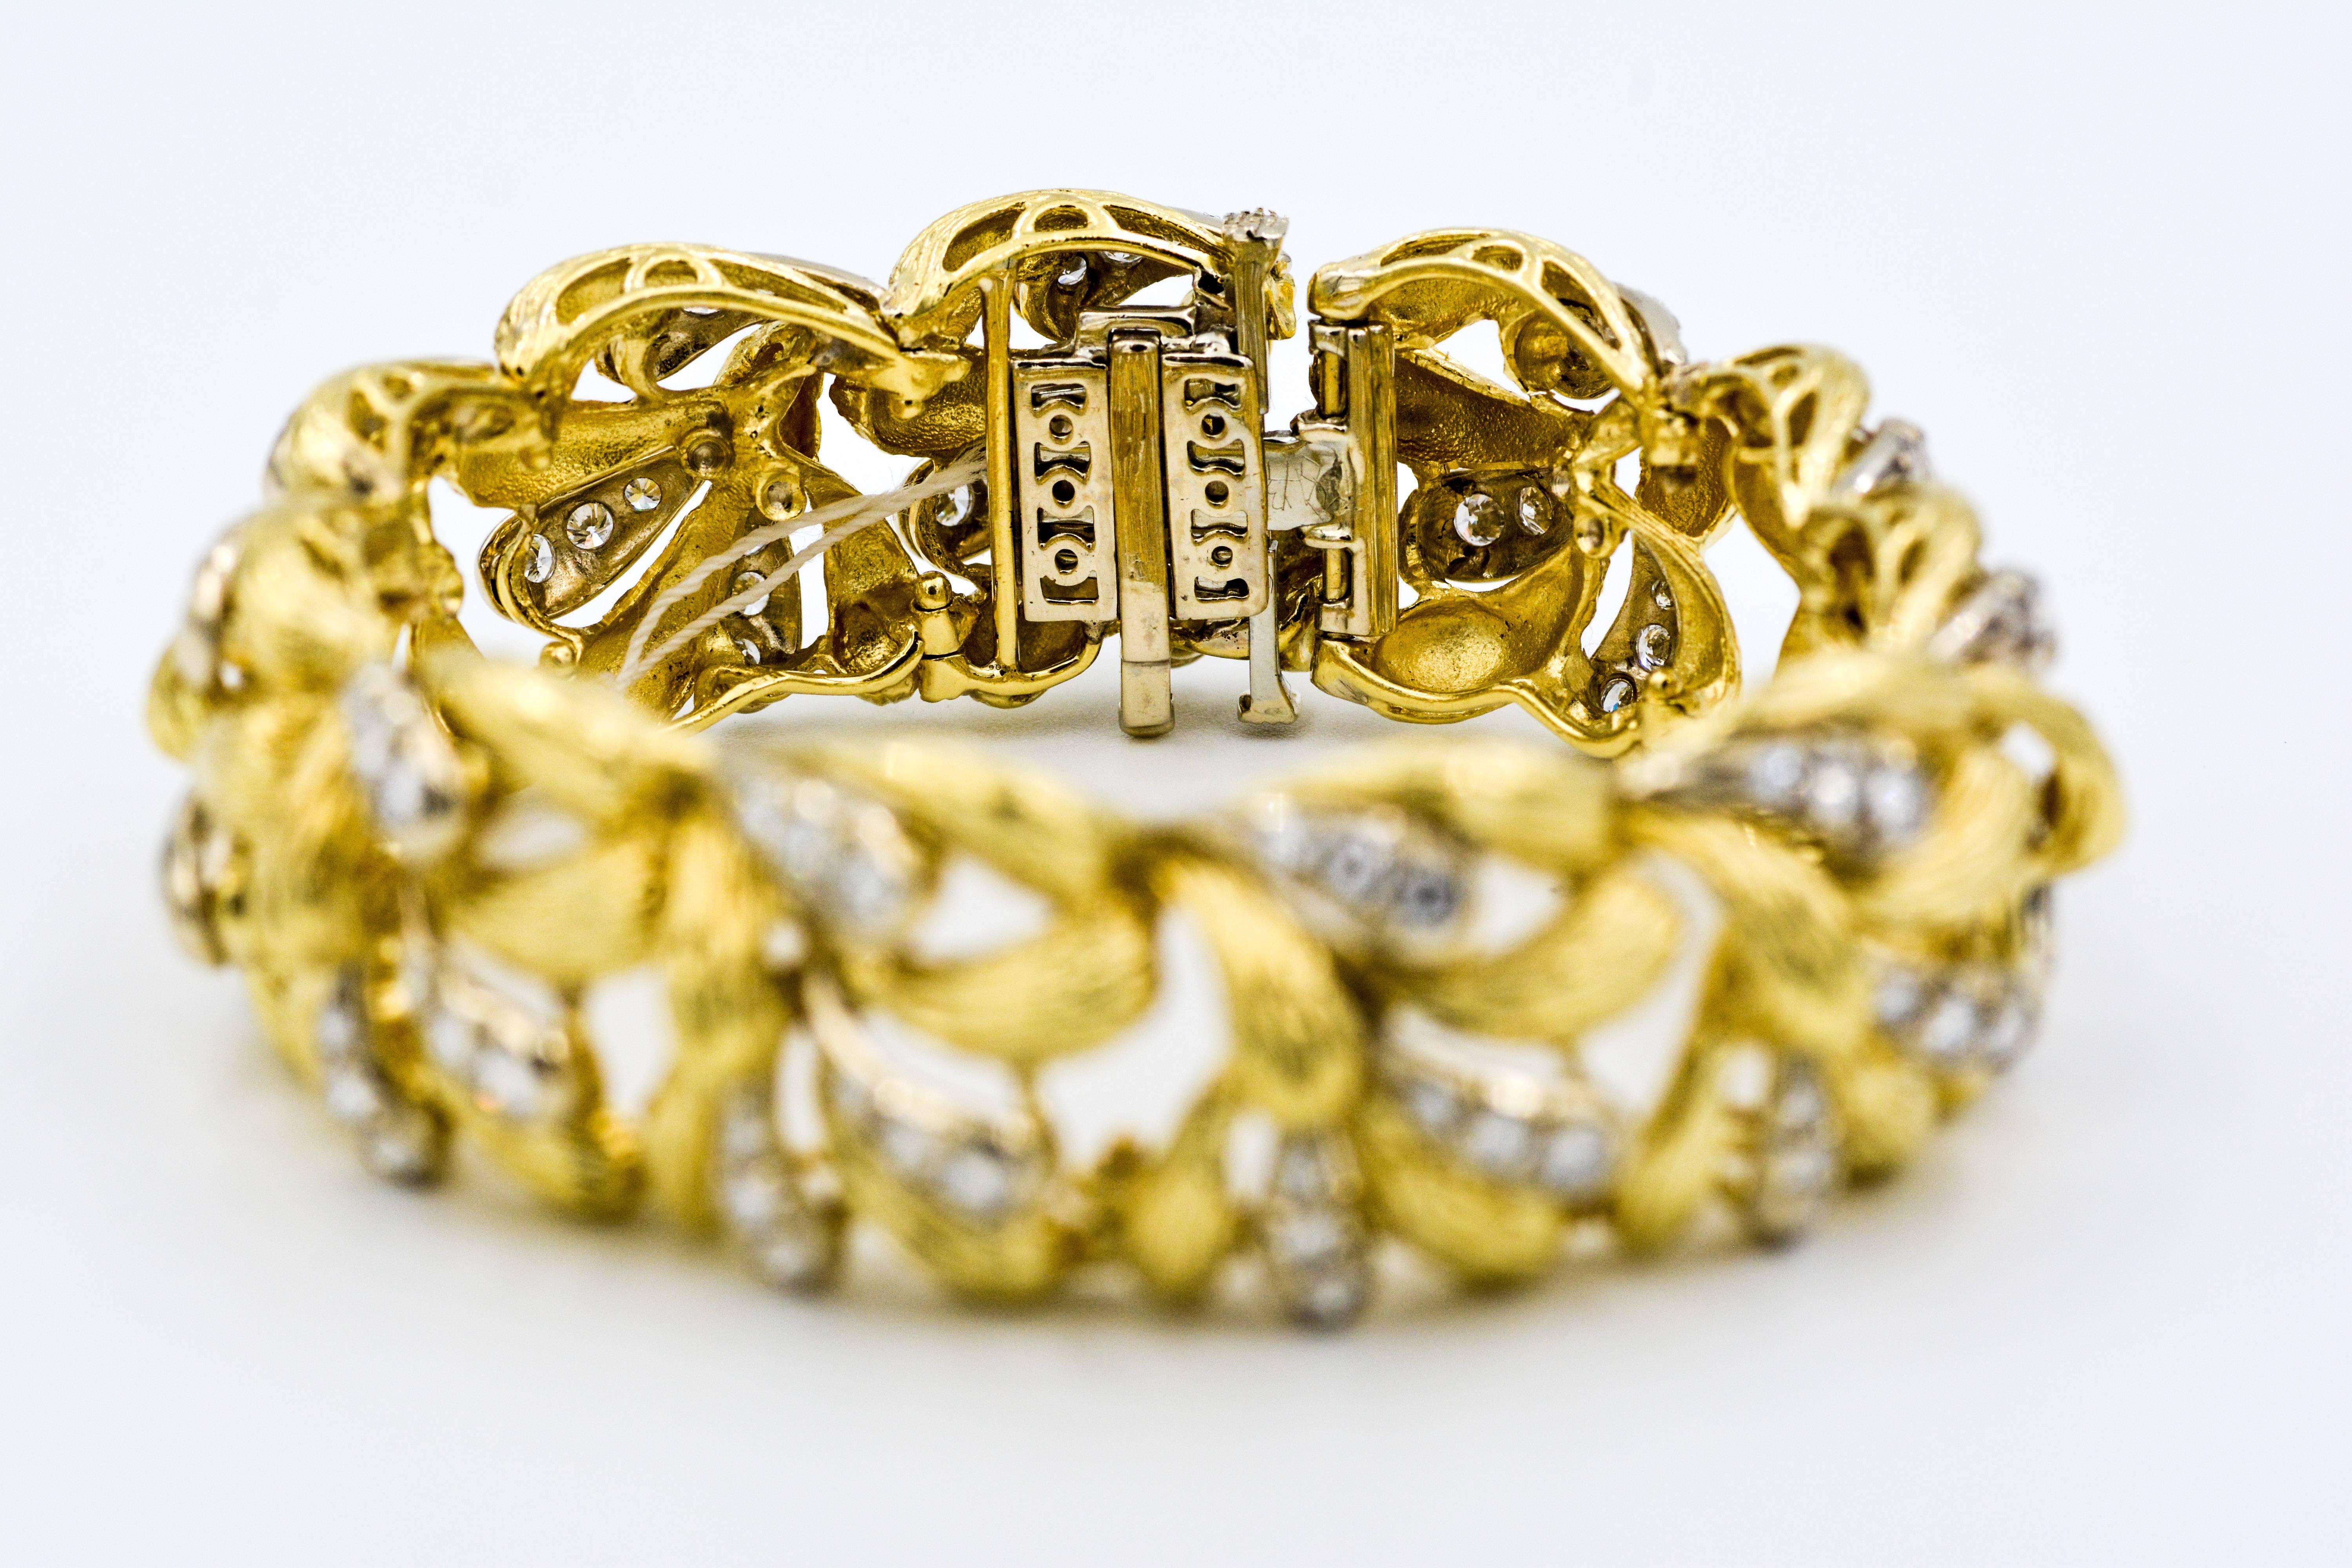 This stunning 18k yellow gold and diamond bracelet is executed with an attractive three dimensional textured paisley design.  The bracelet is set with 99 round brilliant cut diamonds with an approximate total weight of 1.25 carats G-H color and VS